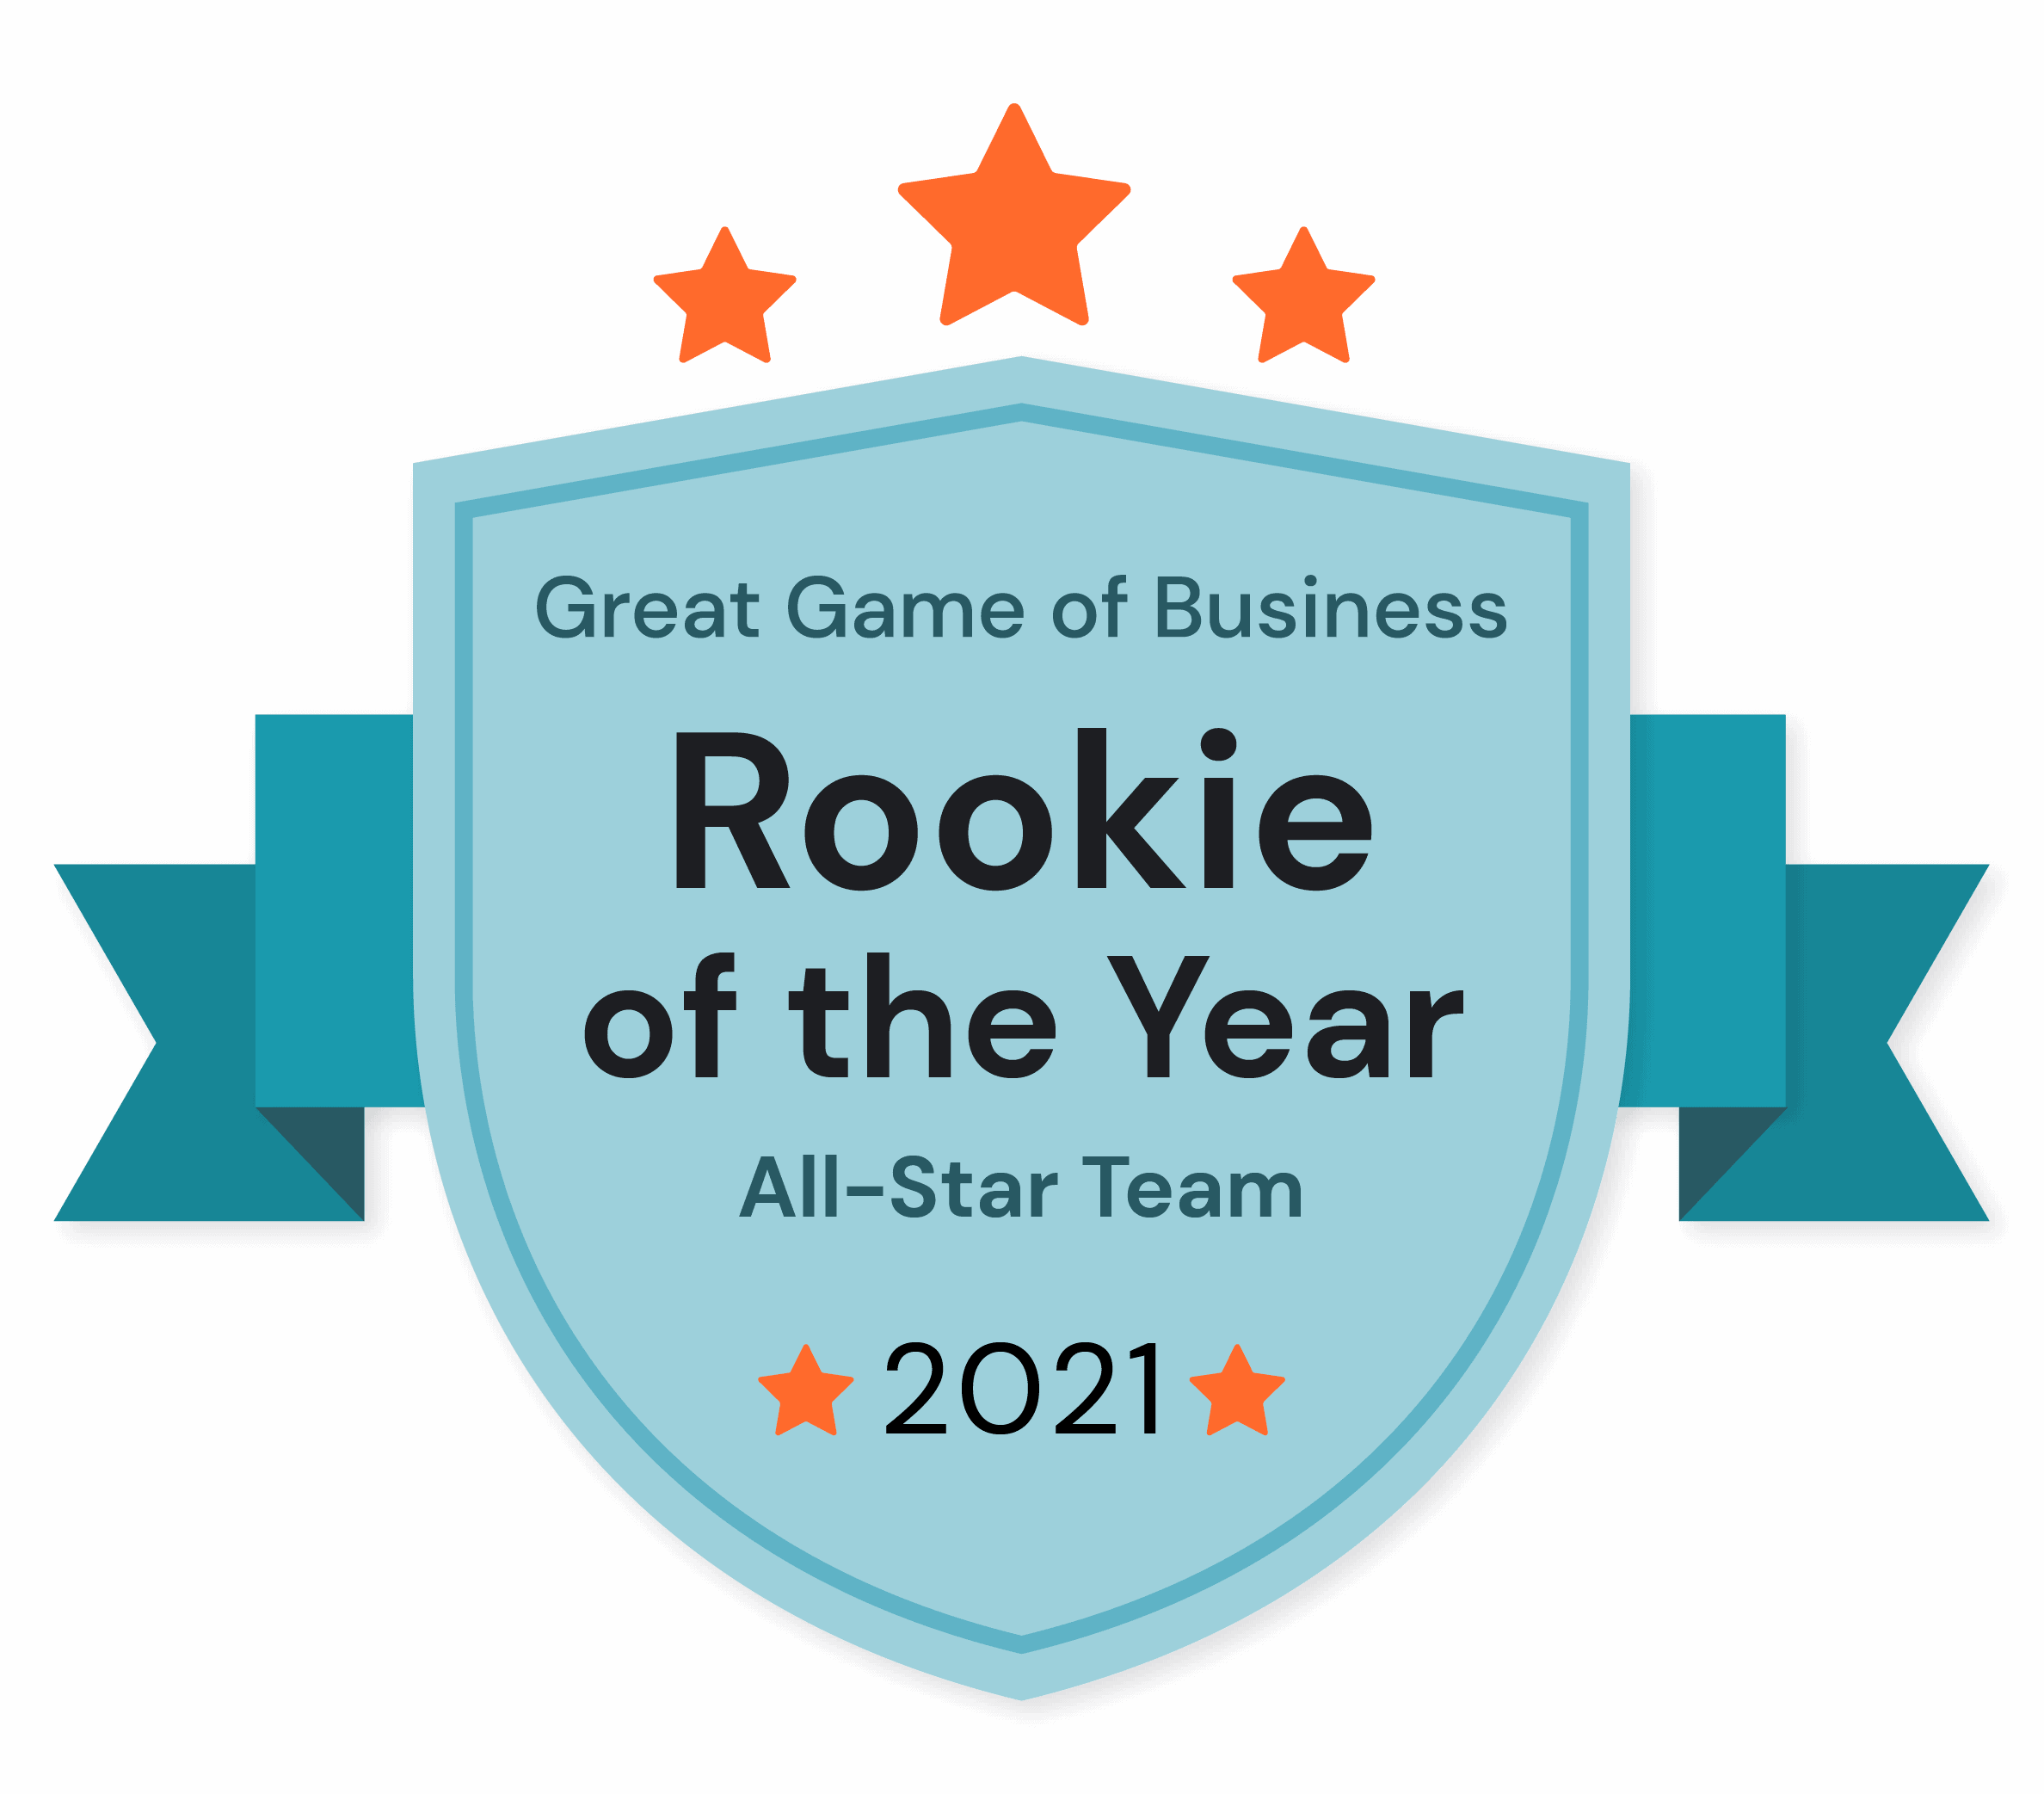 Great game of business rookie of the year all-star team 2021